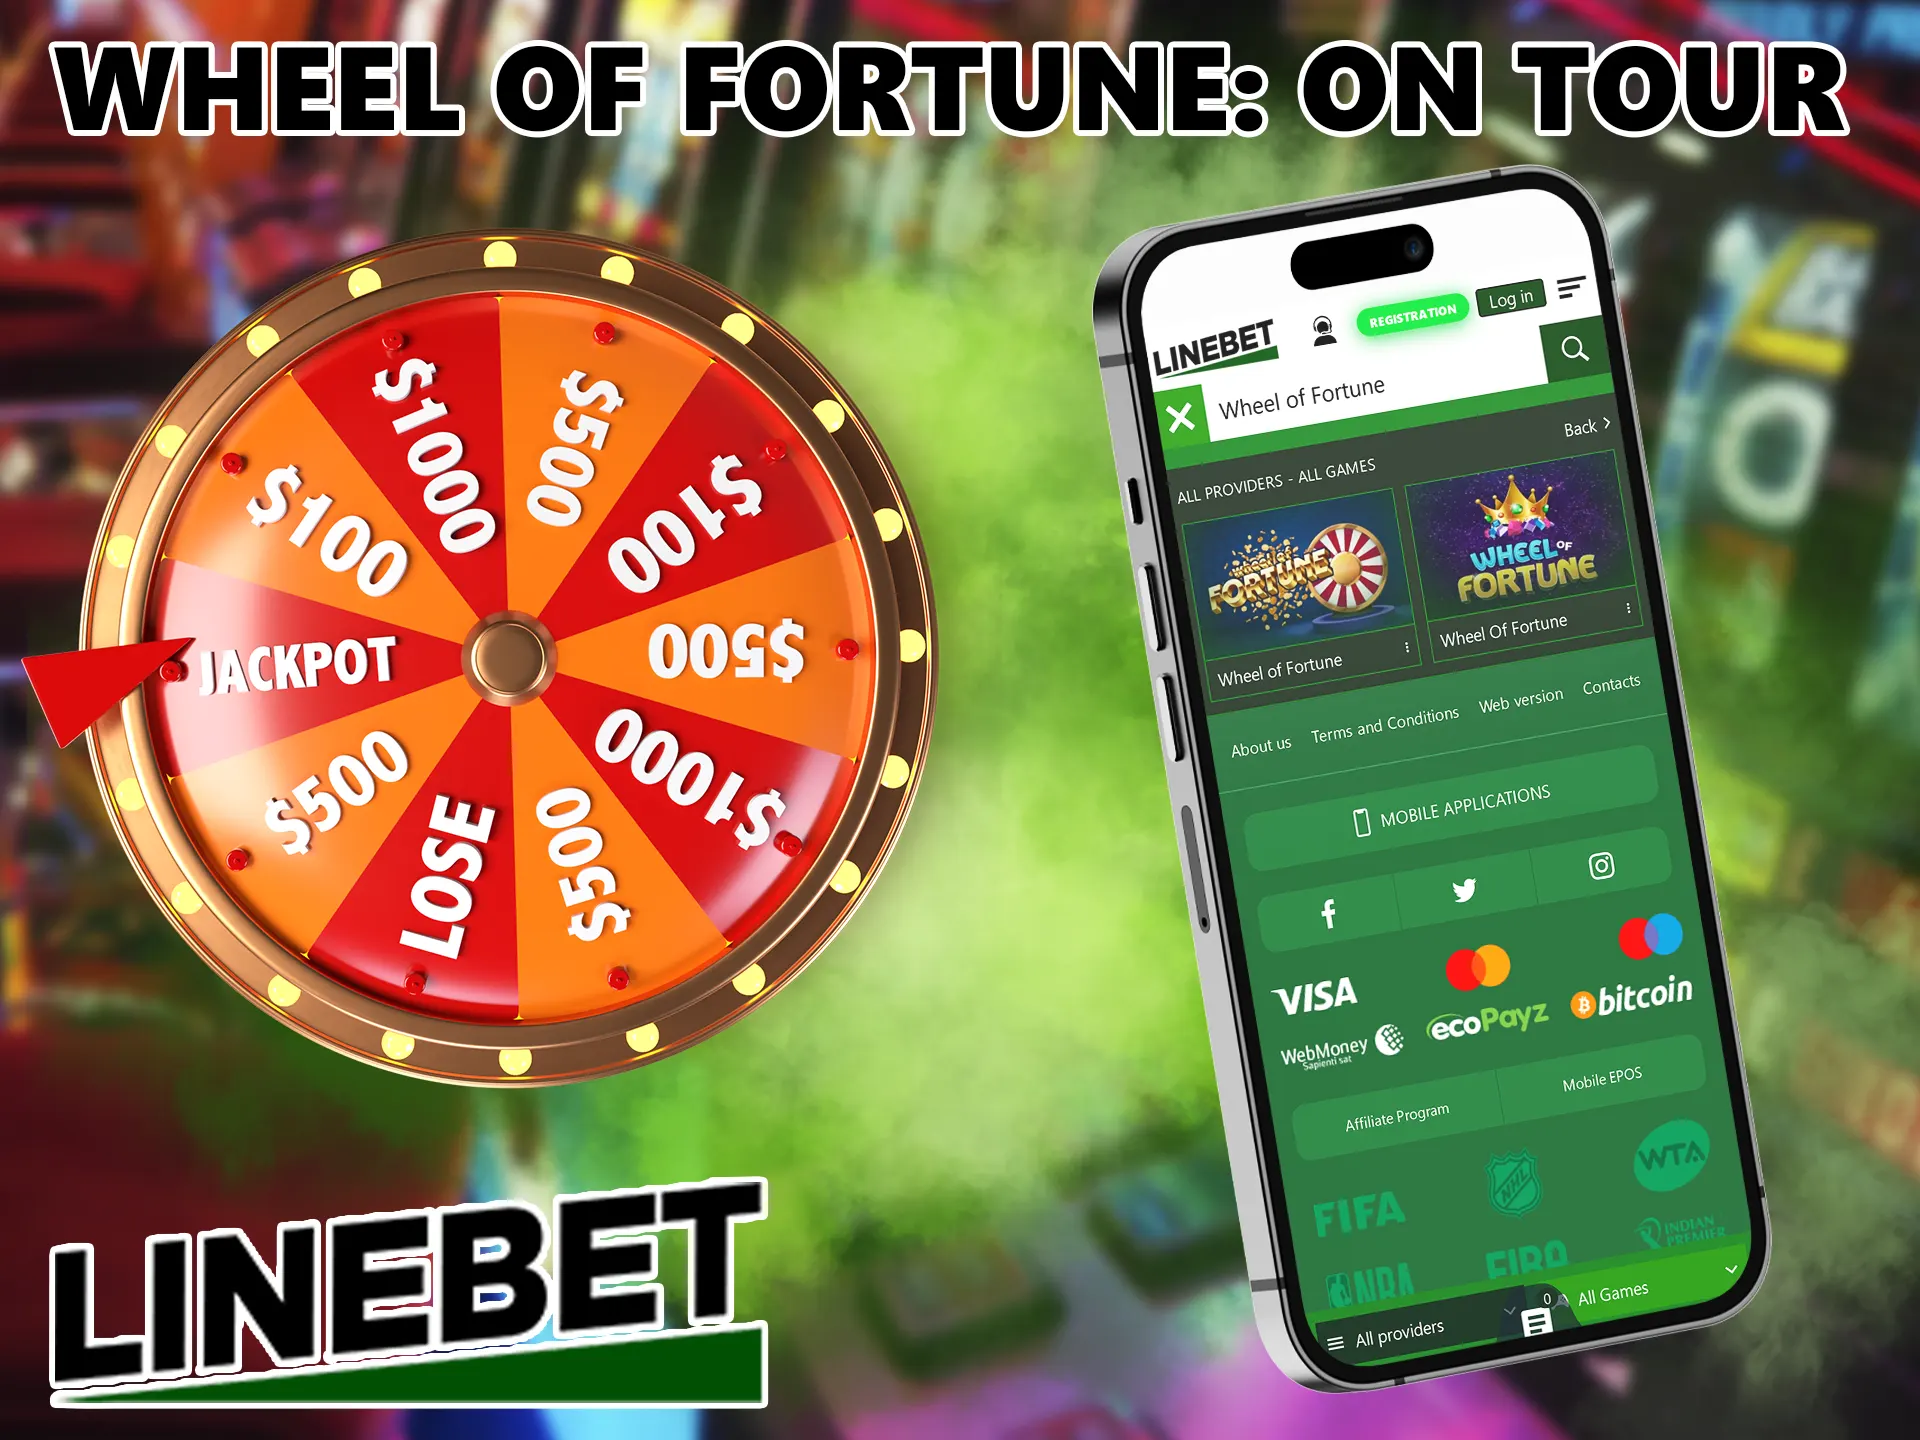 This view offers 5 reels and 30 fixed paylines, try your luck in this exciting game at Linebet.